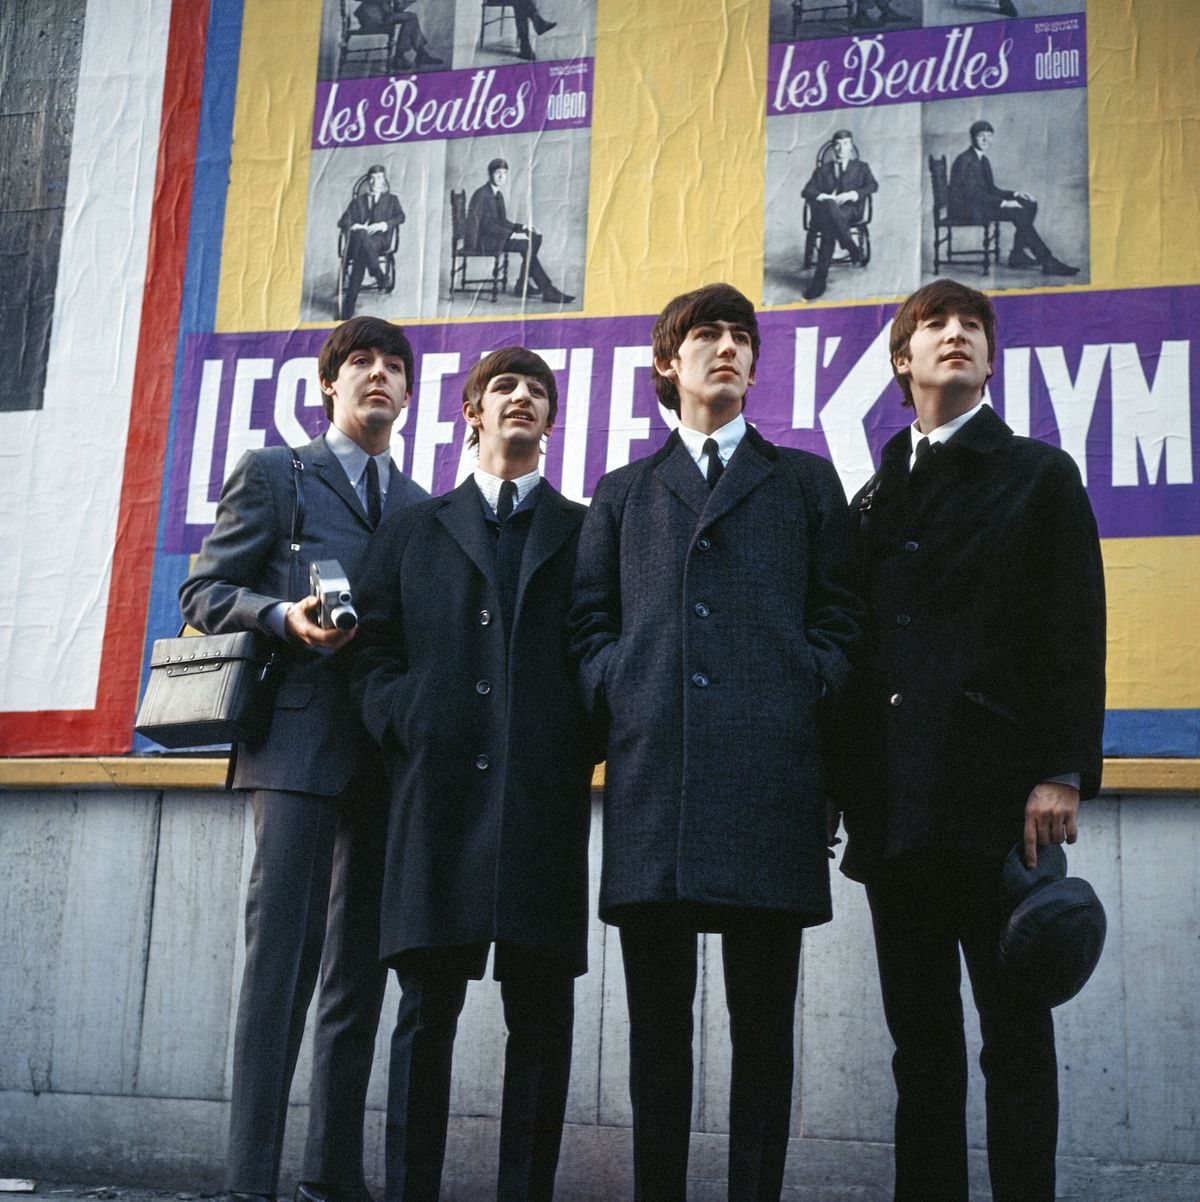 the beatles concert season at the olympia theatre, paris, left to right paul mccartney, ringo starr, george harrison and john lennon 17th january 1964 photo by alisdair macdonaldsyndication mirrorpix via getty images